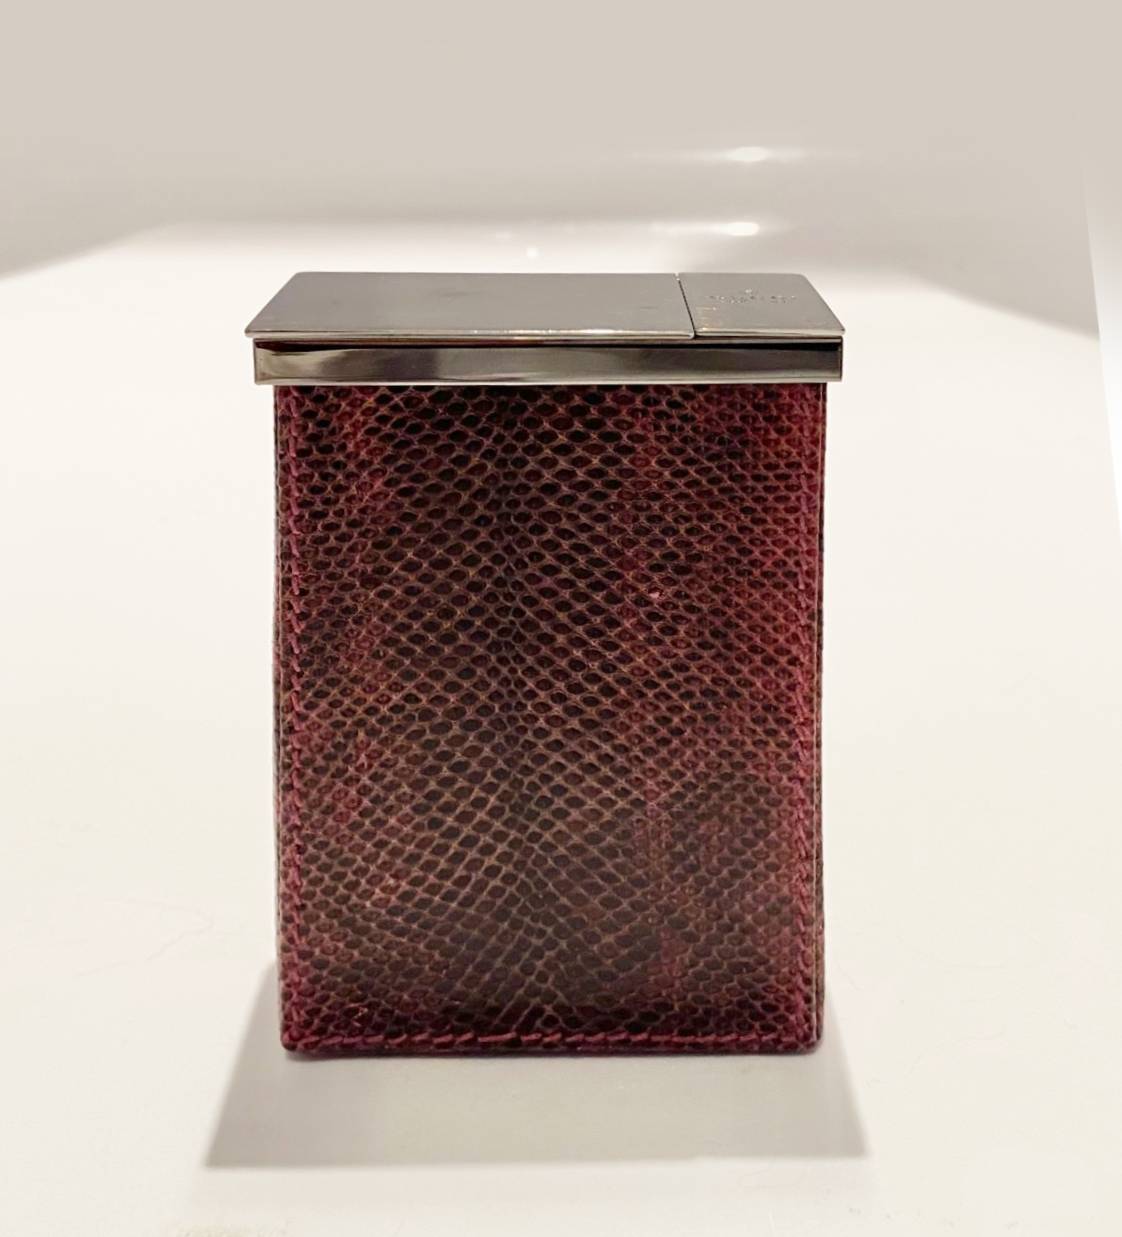 2000s Tom Ford for Gucci Snake Print Leather Cigarette Case Box - style - CHNGR